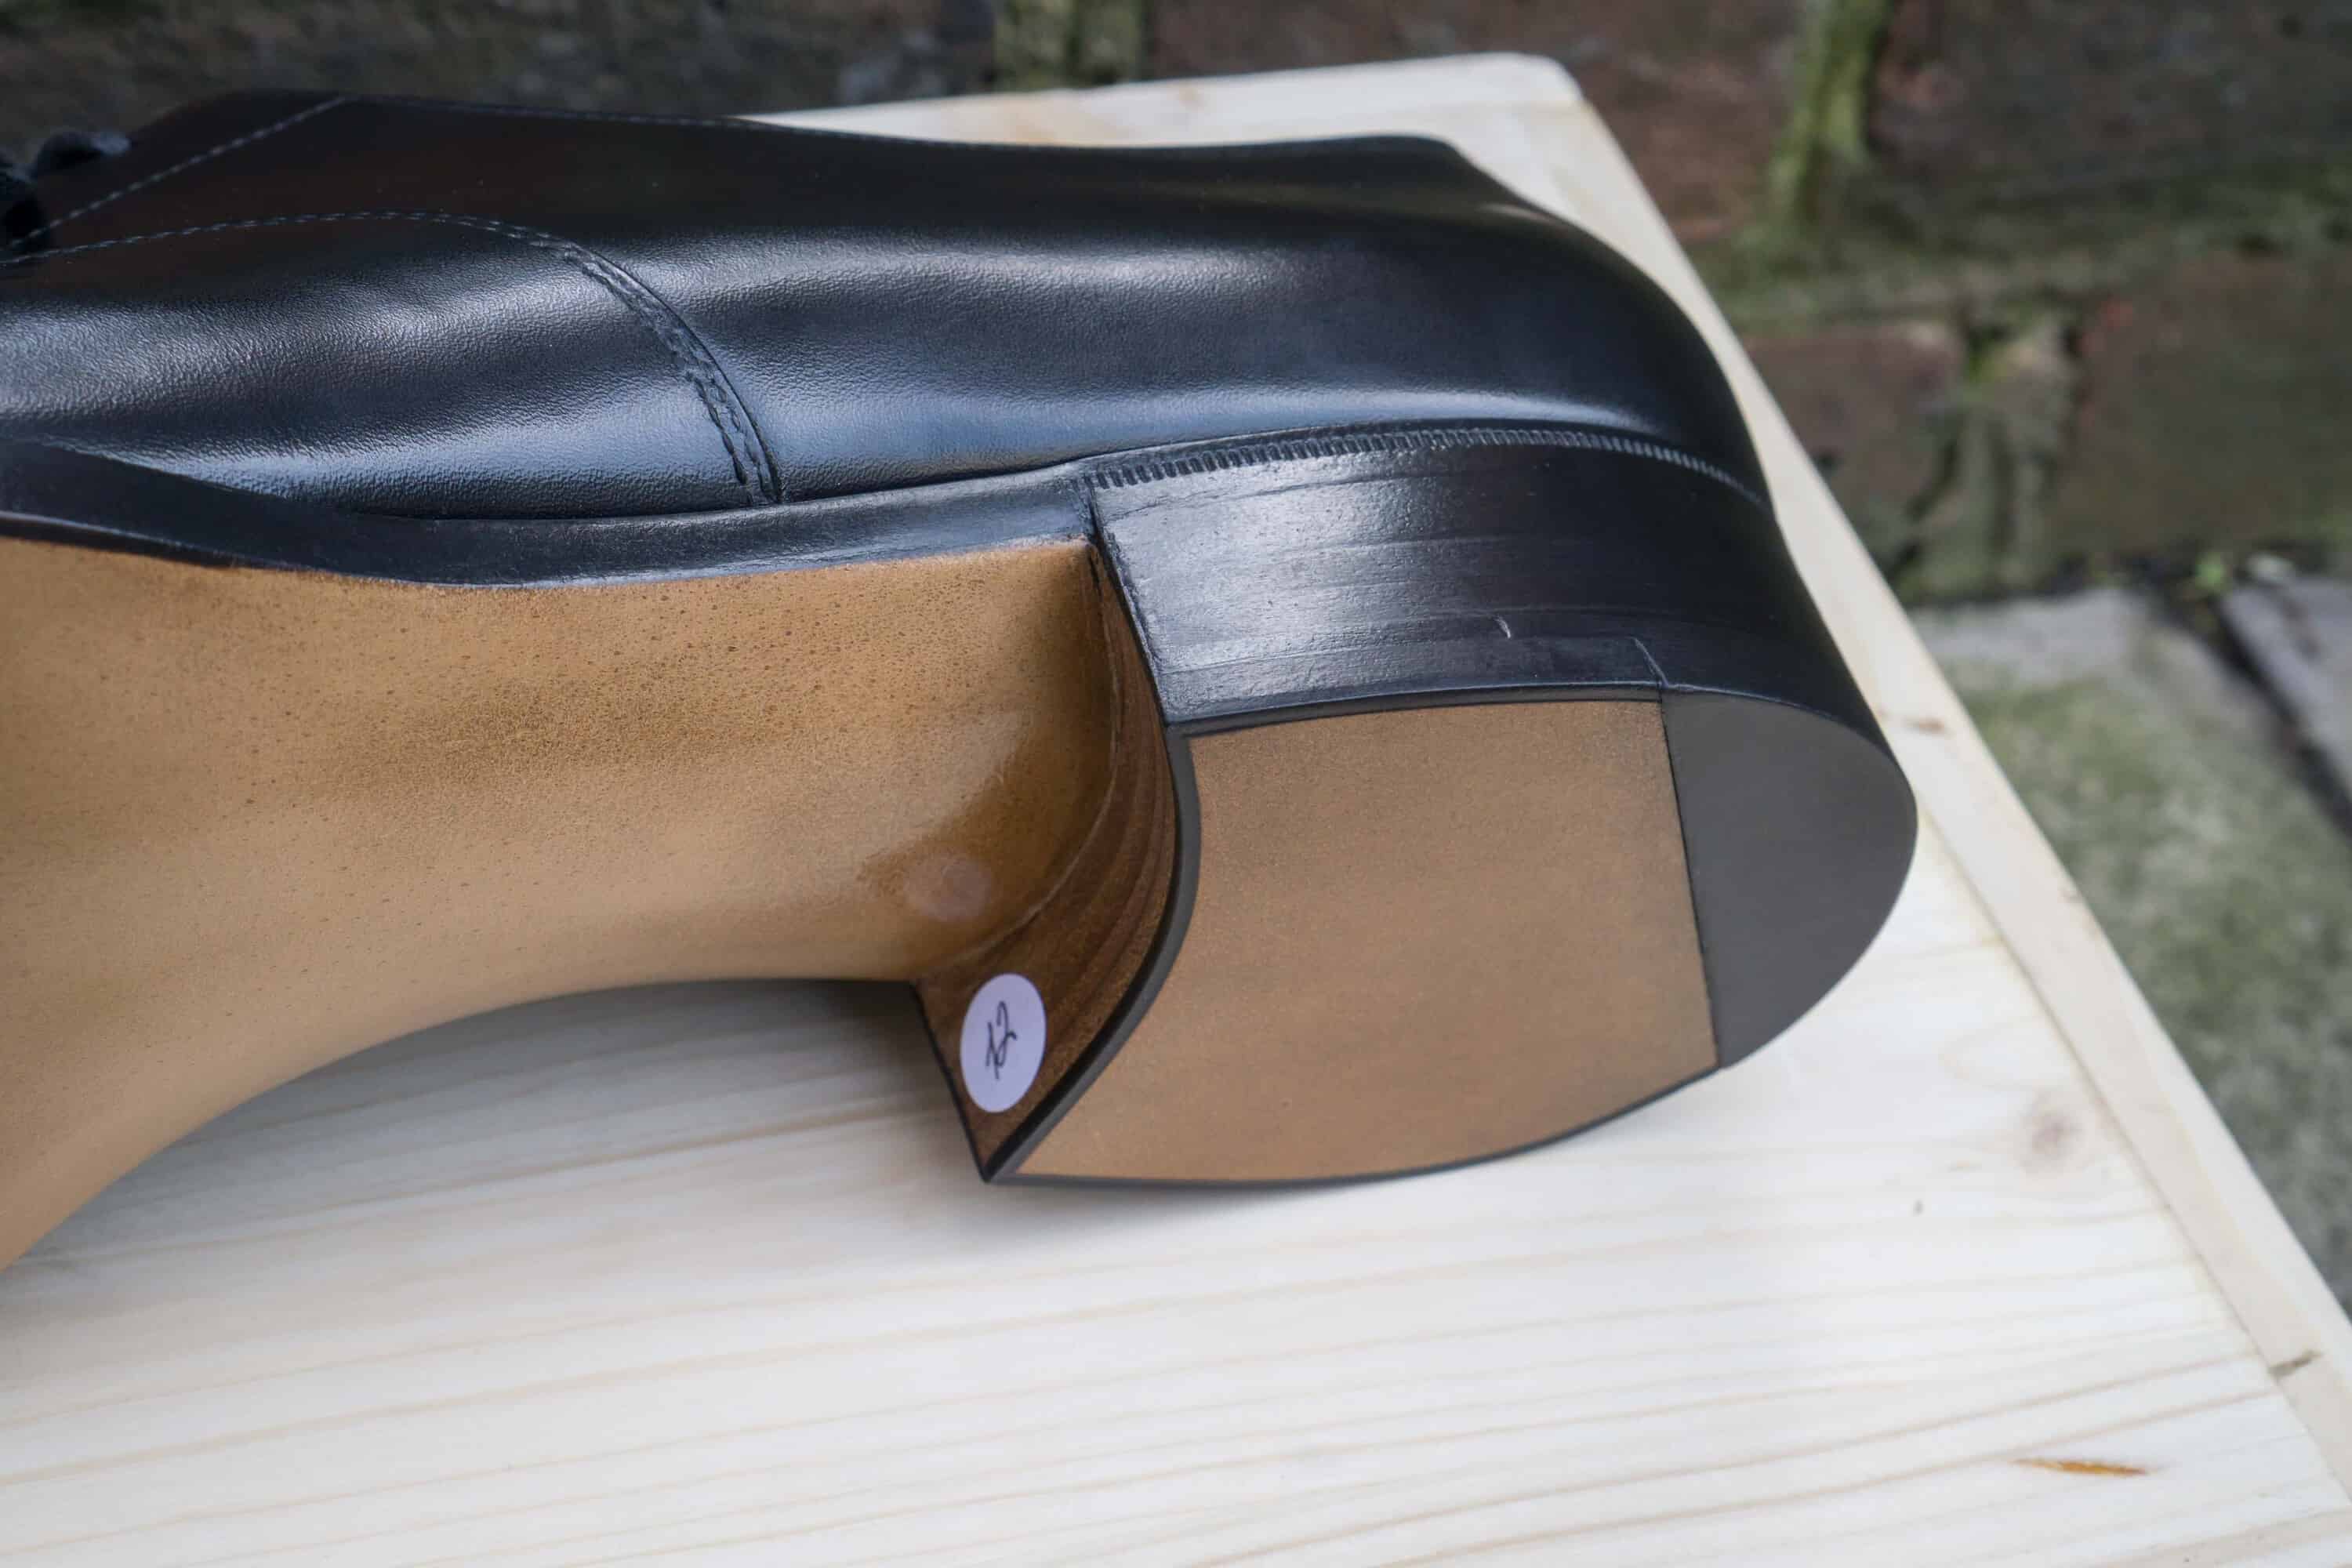 World Championships in Shoemaking The Competition’s Shoe Entries Part 1